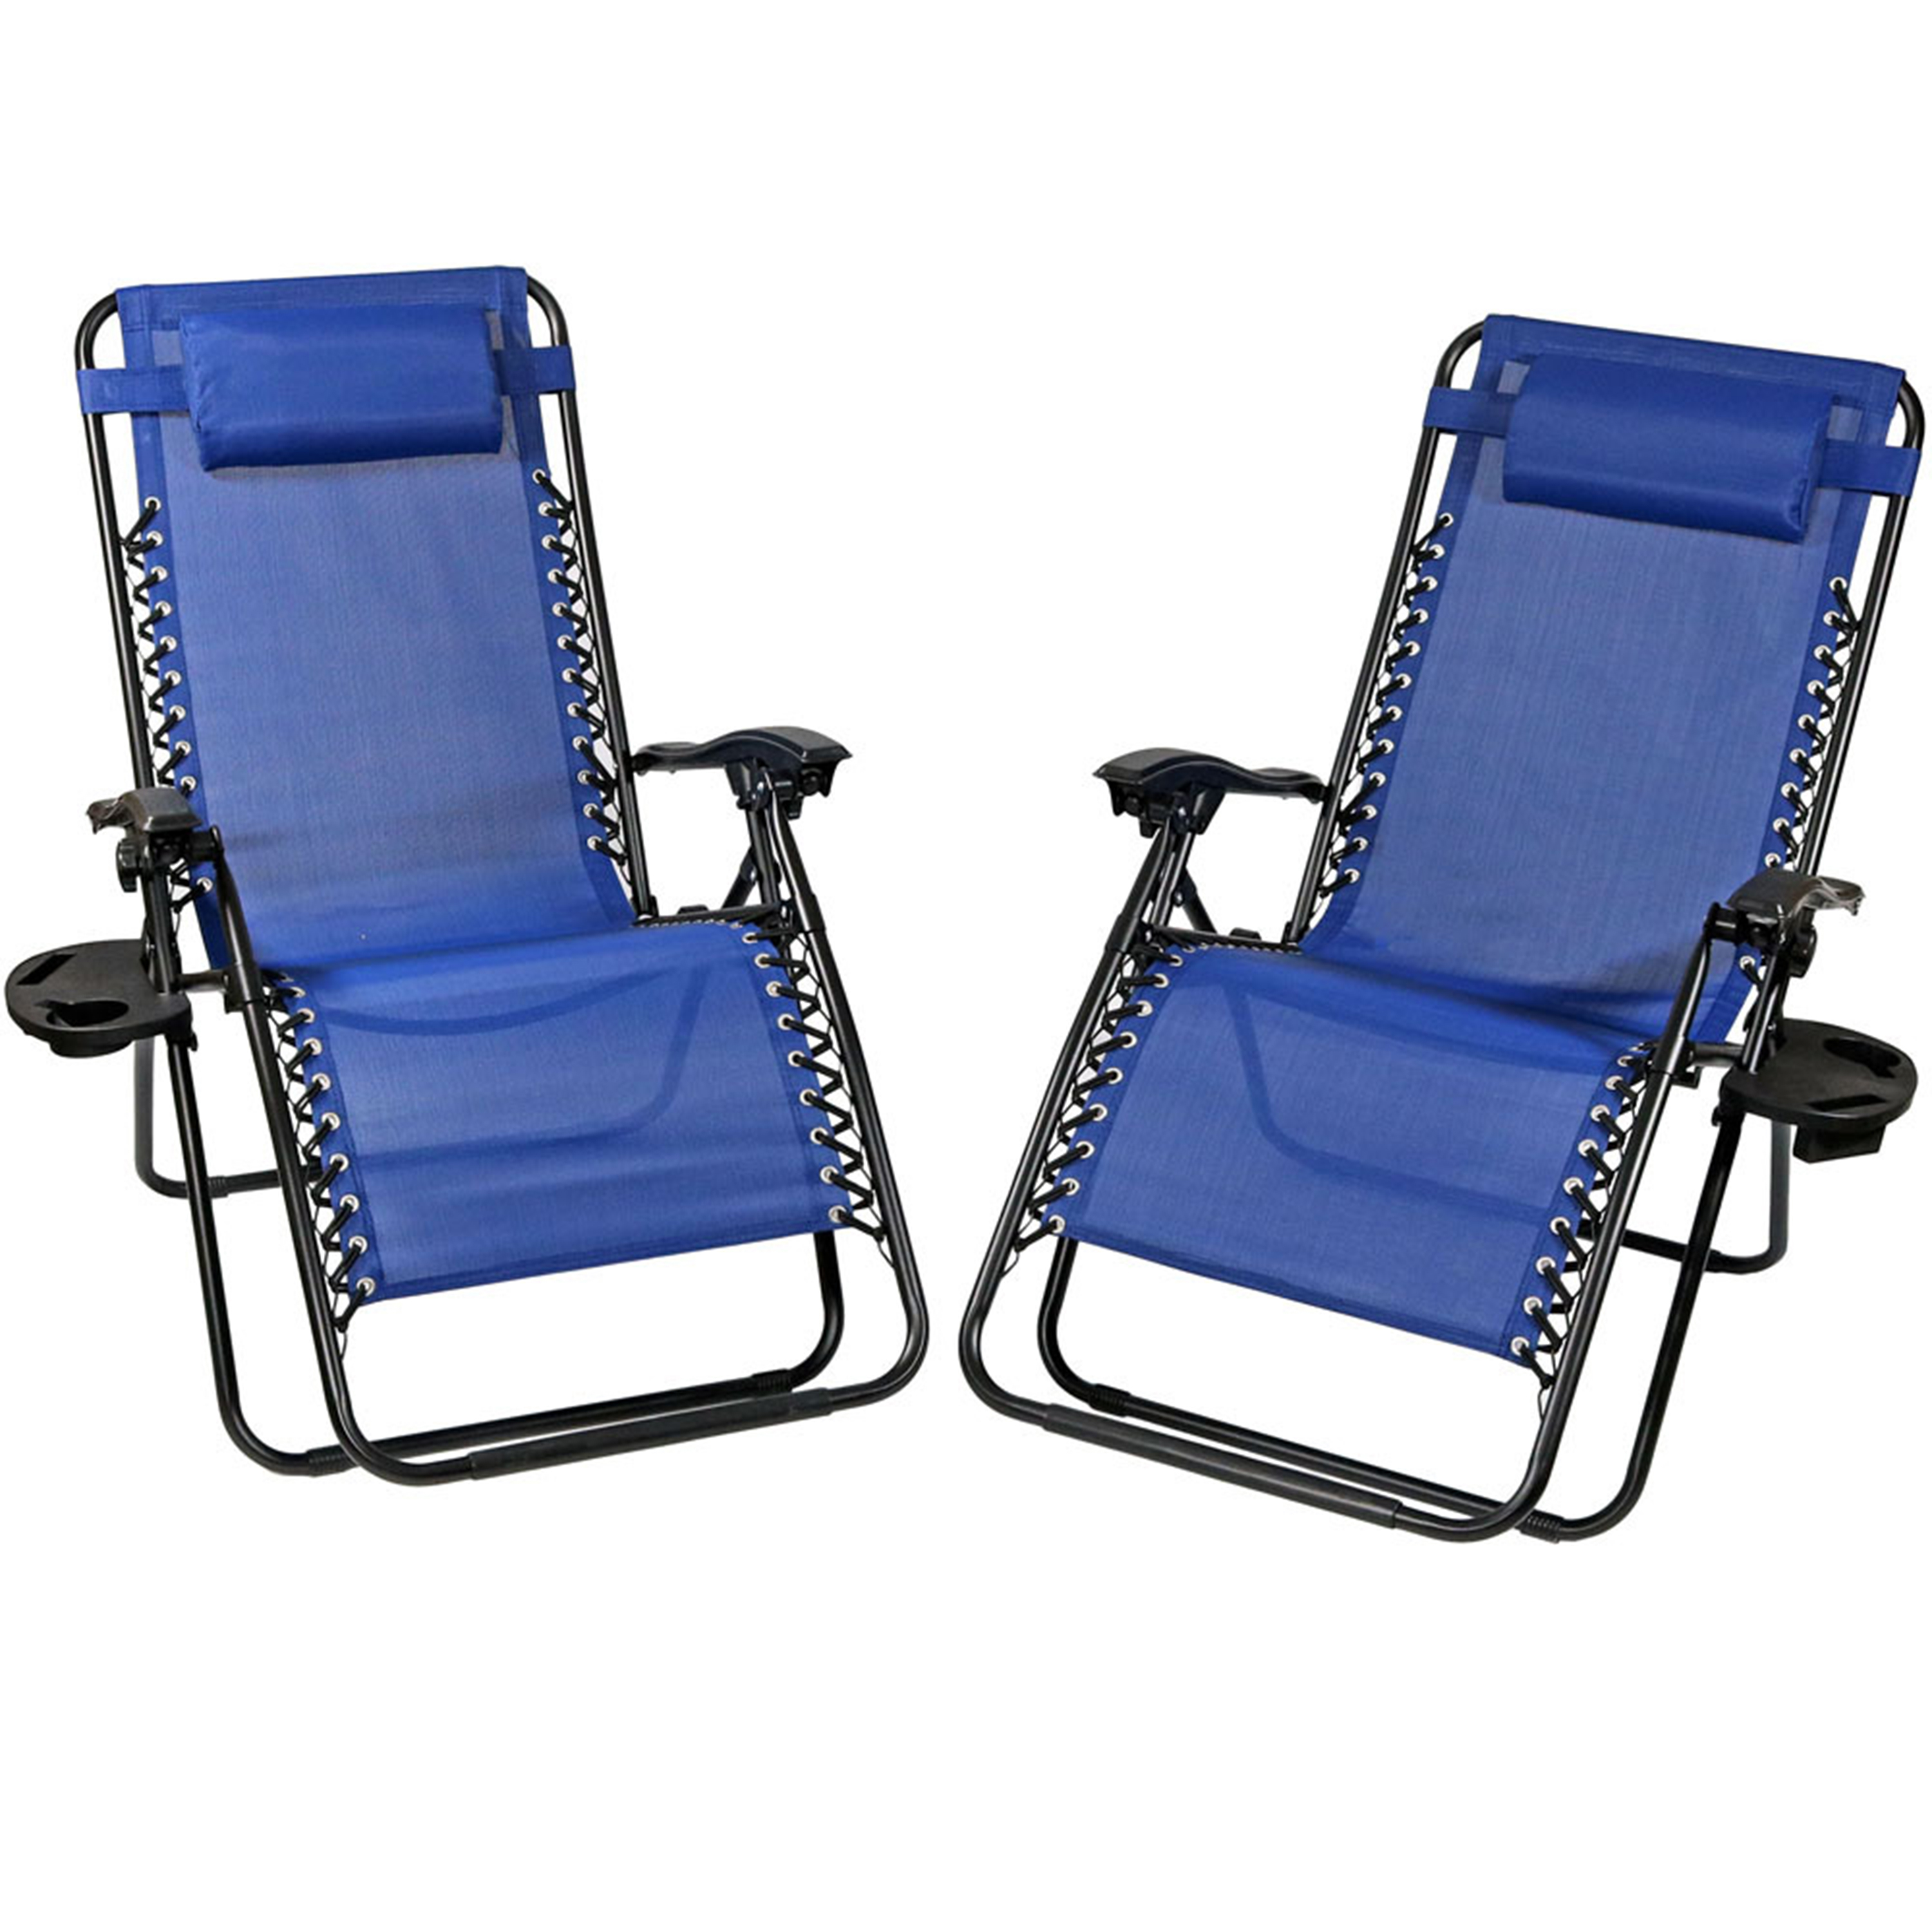 XL Zero Gravity Chair with Cup Holder - Navy Blue - Set of 2